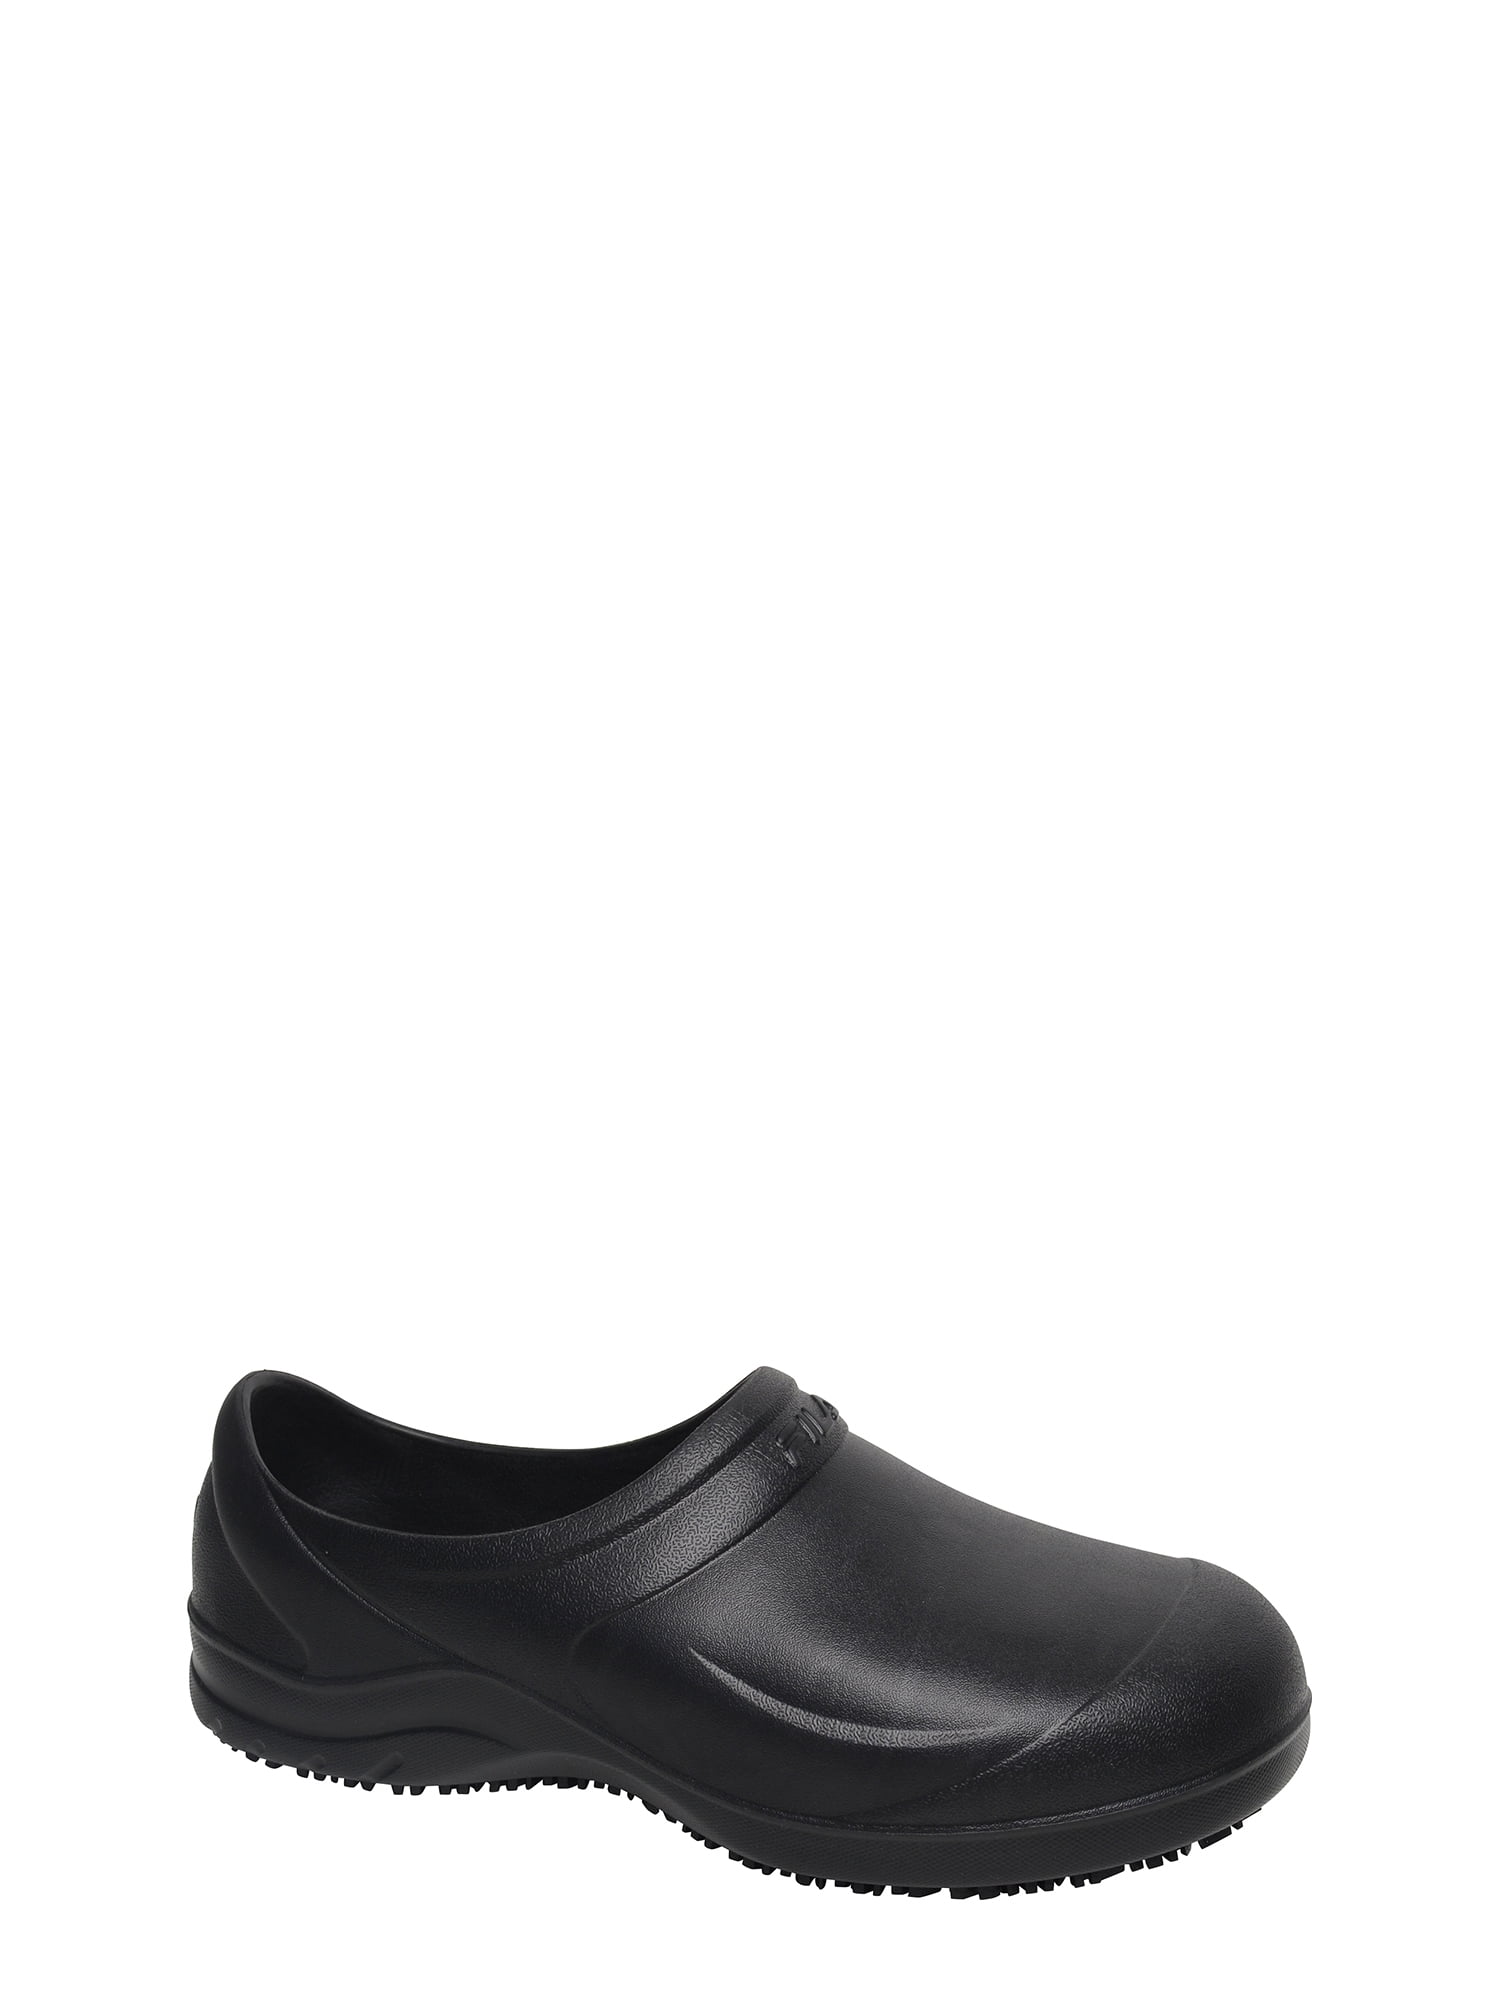 mens leather clogs wide width